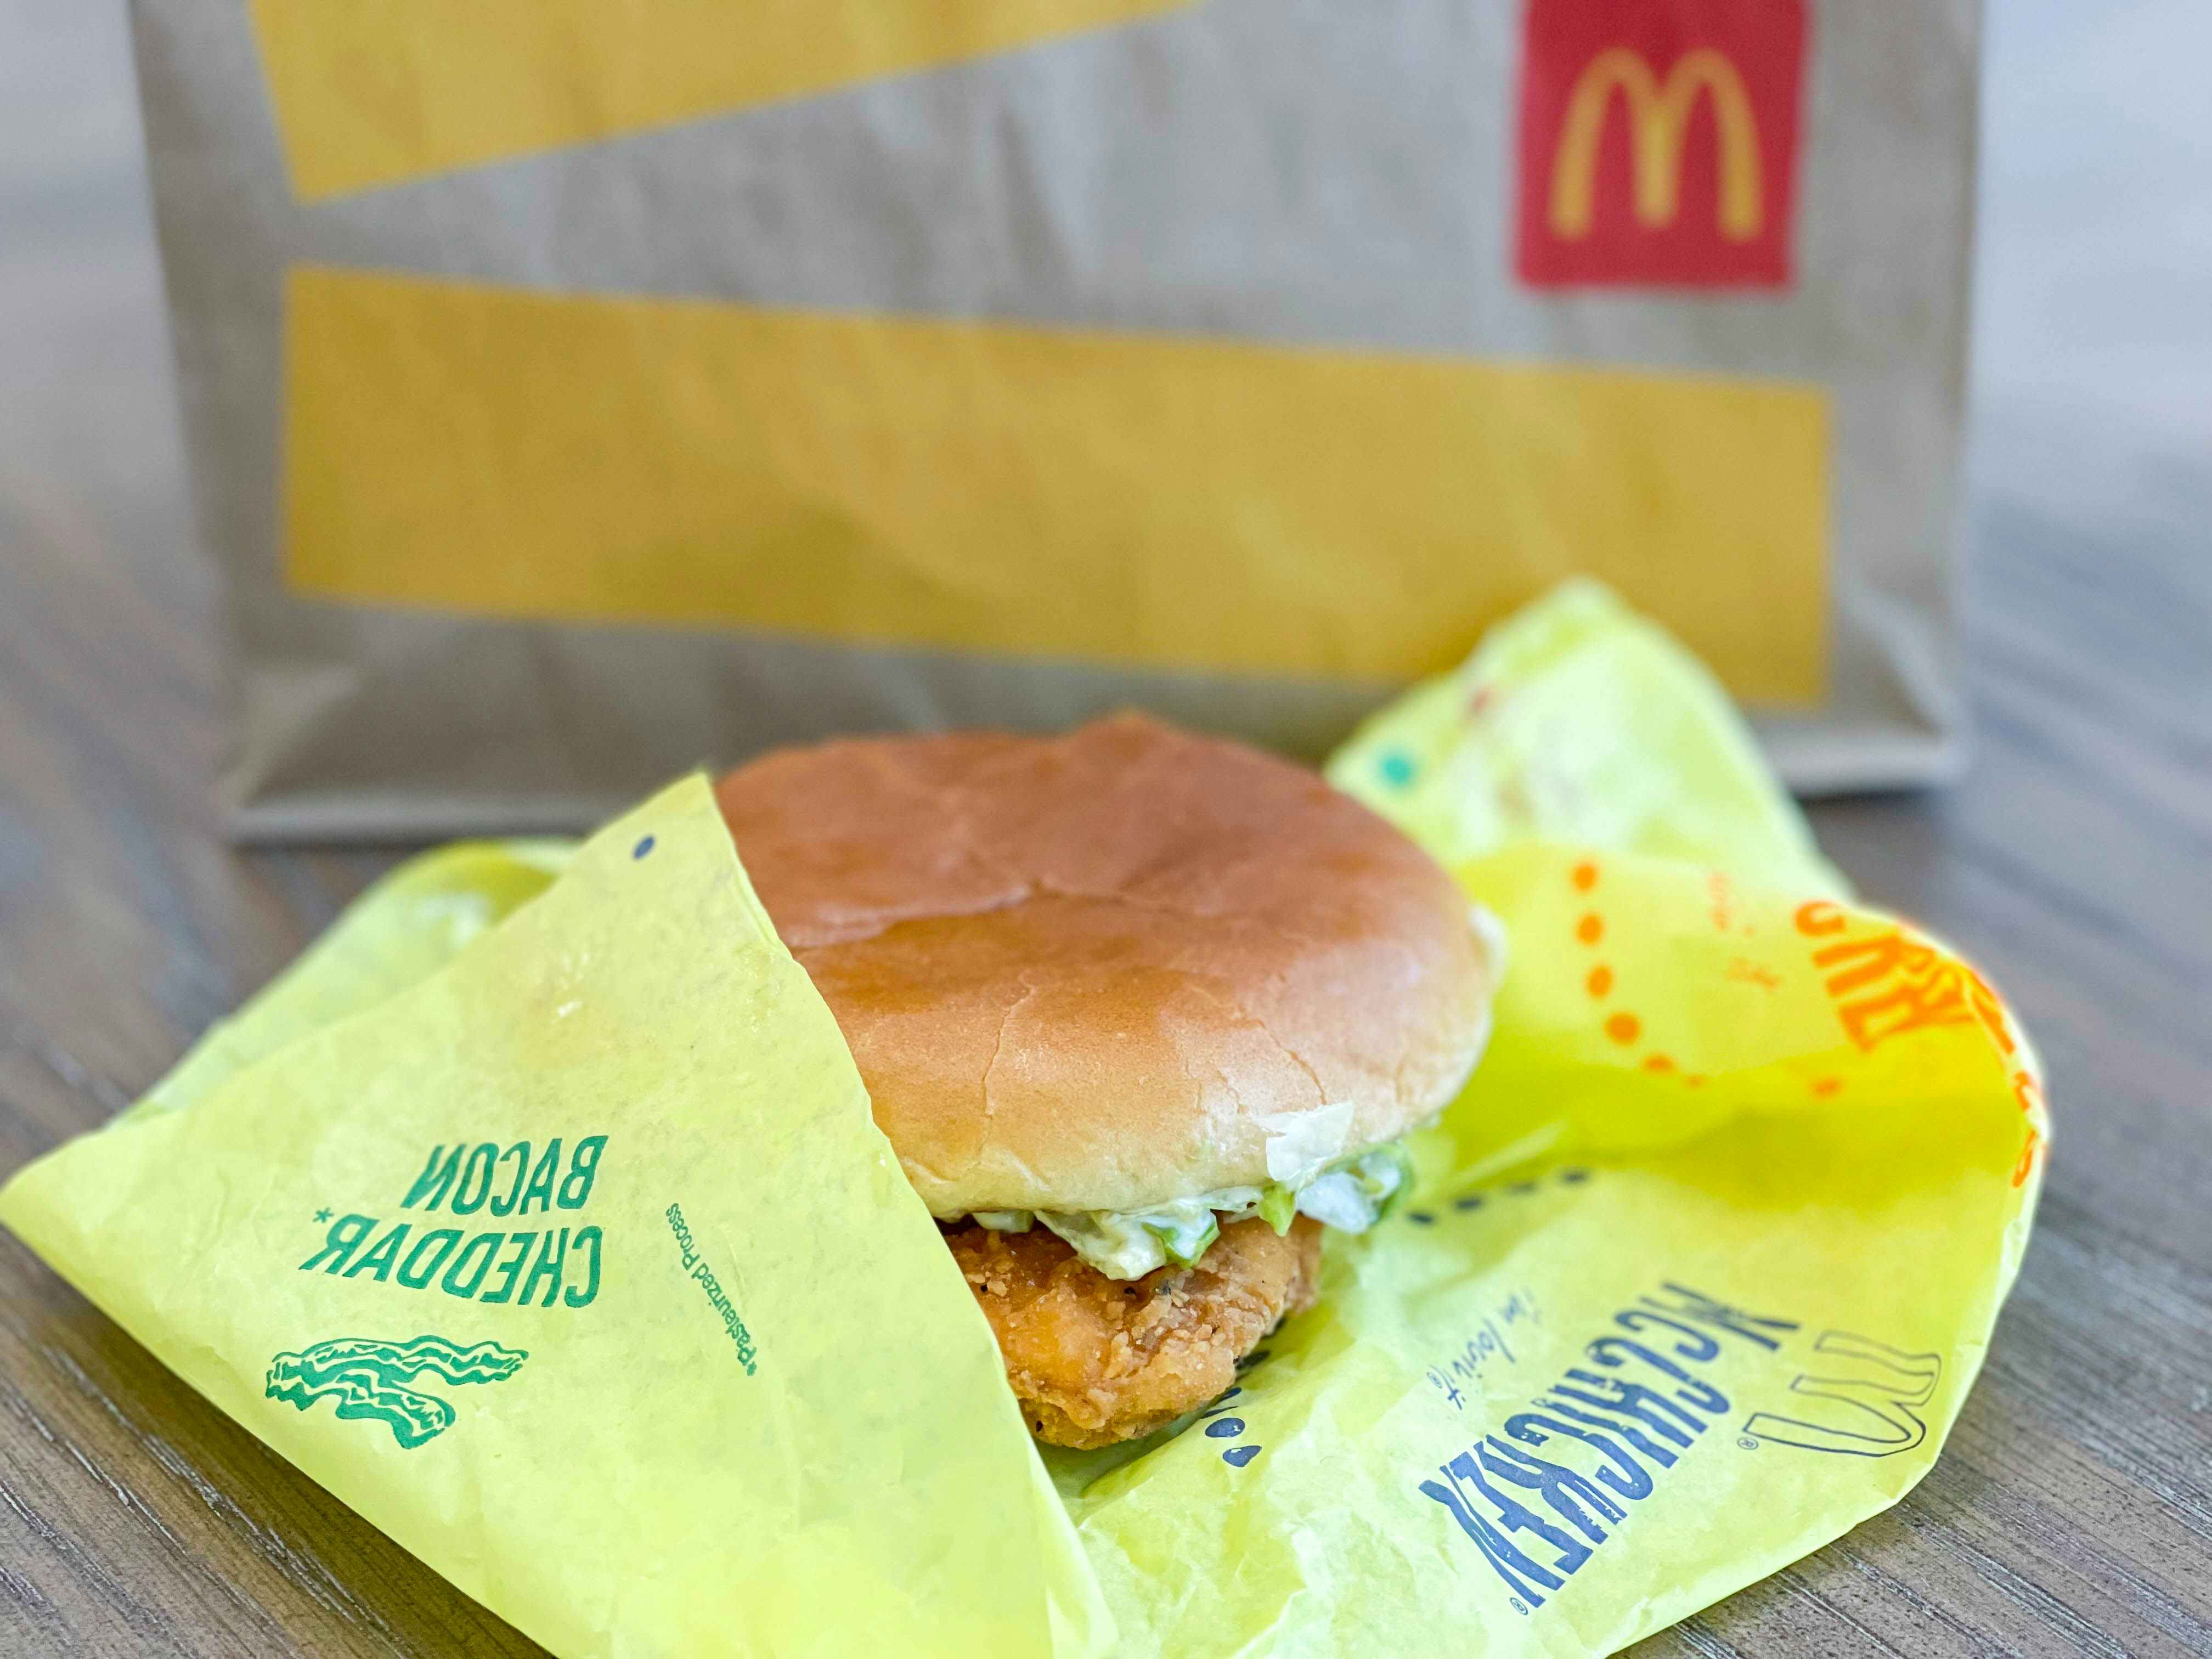 A close-up of a McChicken with bacon and cheese sitting on its paper wrapper in front of a McDonald's takeout bag.